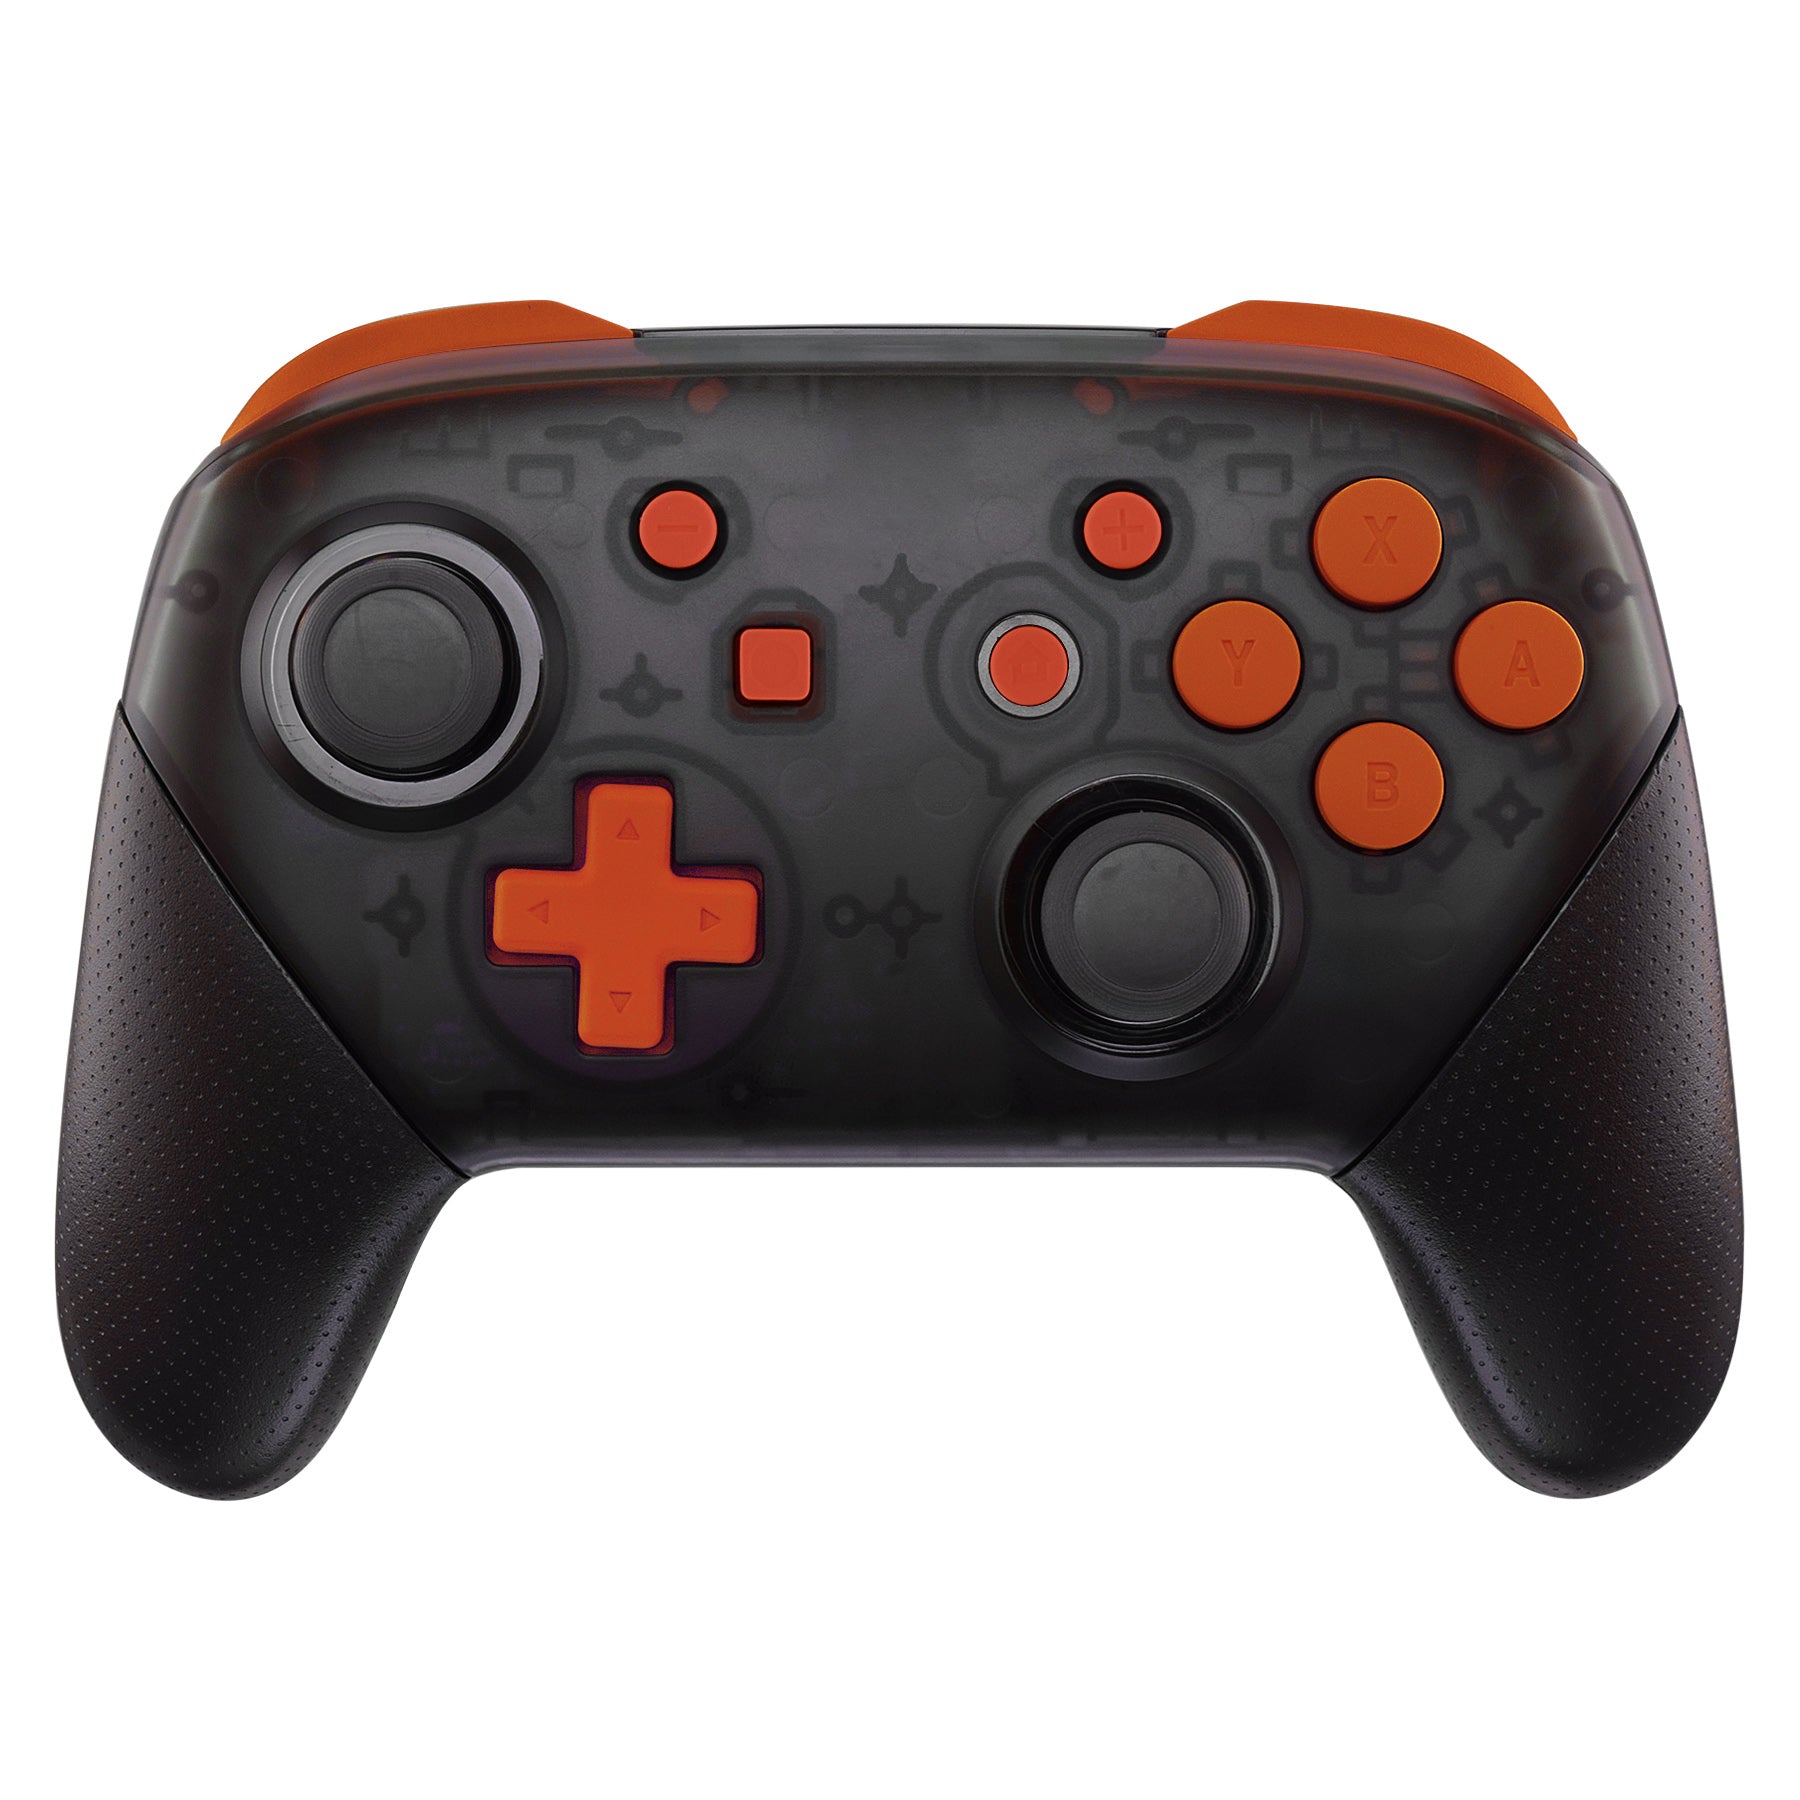 eXtremeRate Retail Orange Repair ABXY D-pad ZR ZL L R Keys for Nintendo Switch Pro Controller, DIY Replacement Full Set Buttons with Tools for Nintendo Switch Pro - Controller NOT Included - KRP303